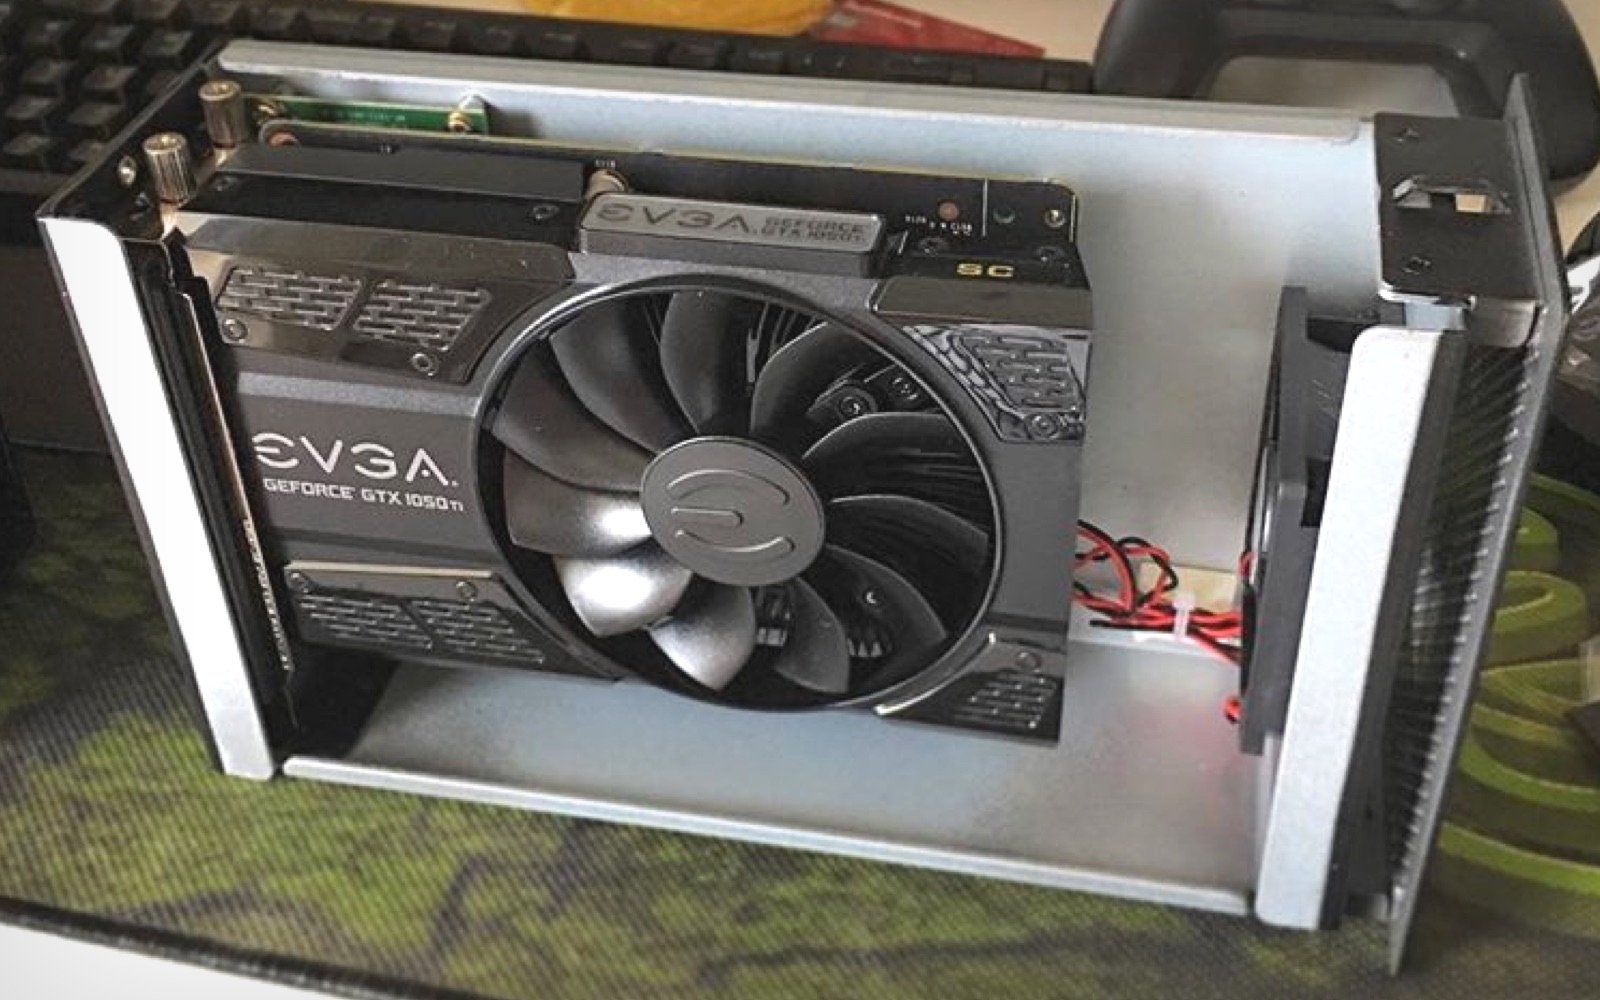 The NVidia Geforce 1050ti by EVGA mounted inside the Akitio Thunder 2 chassis